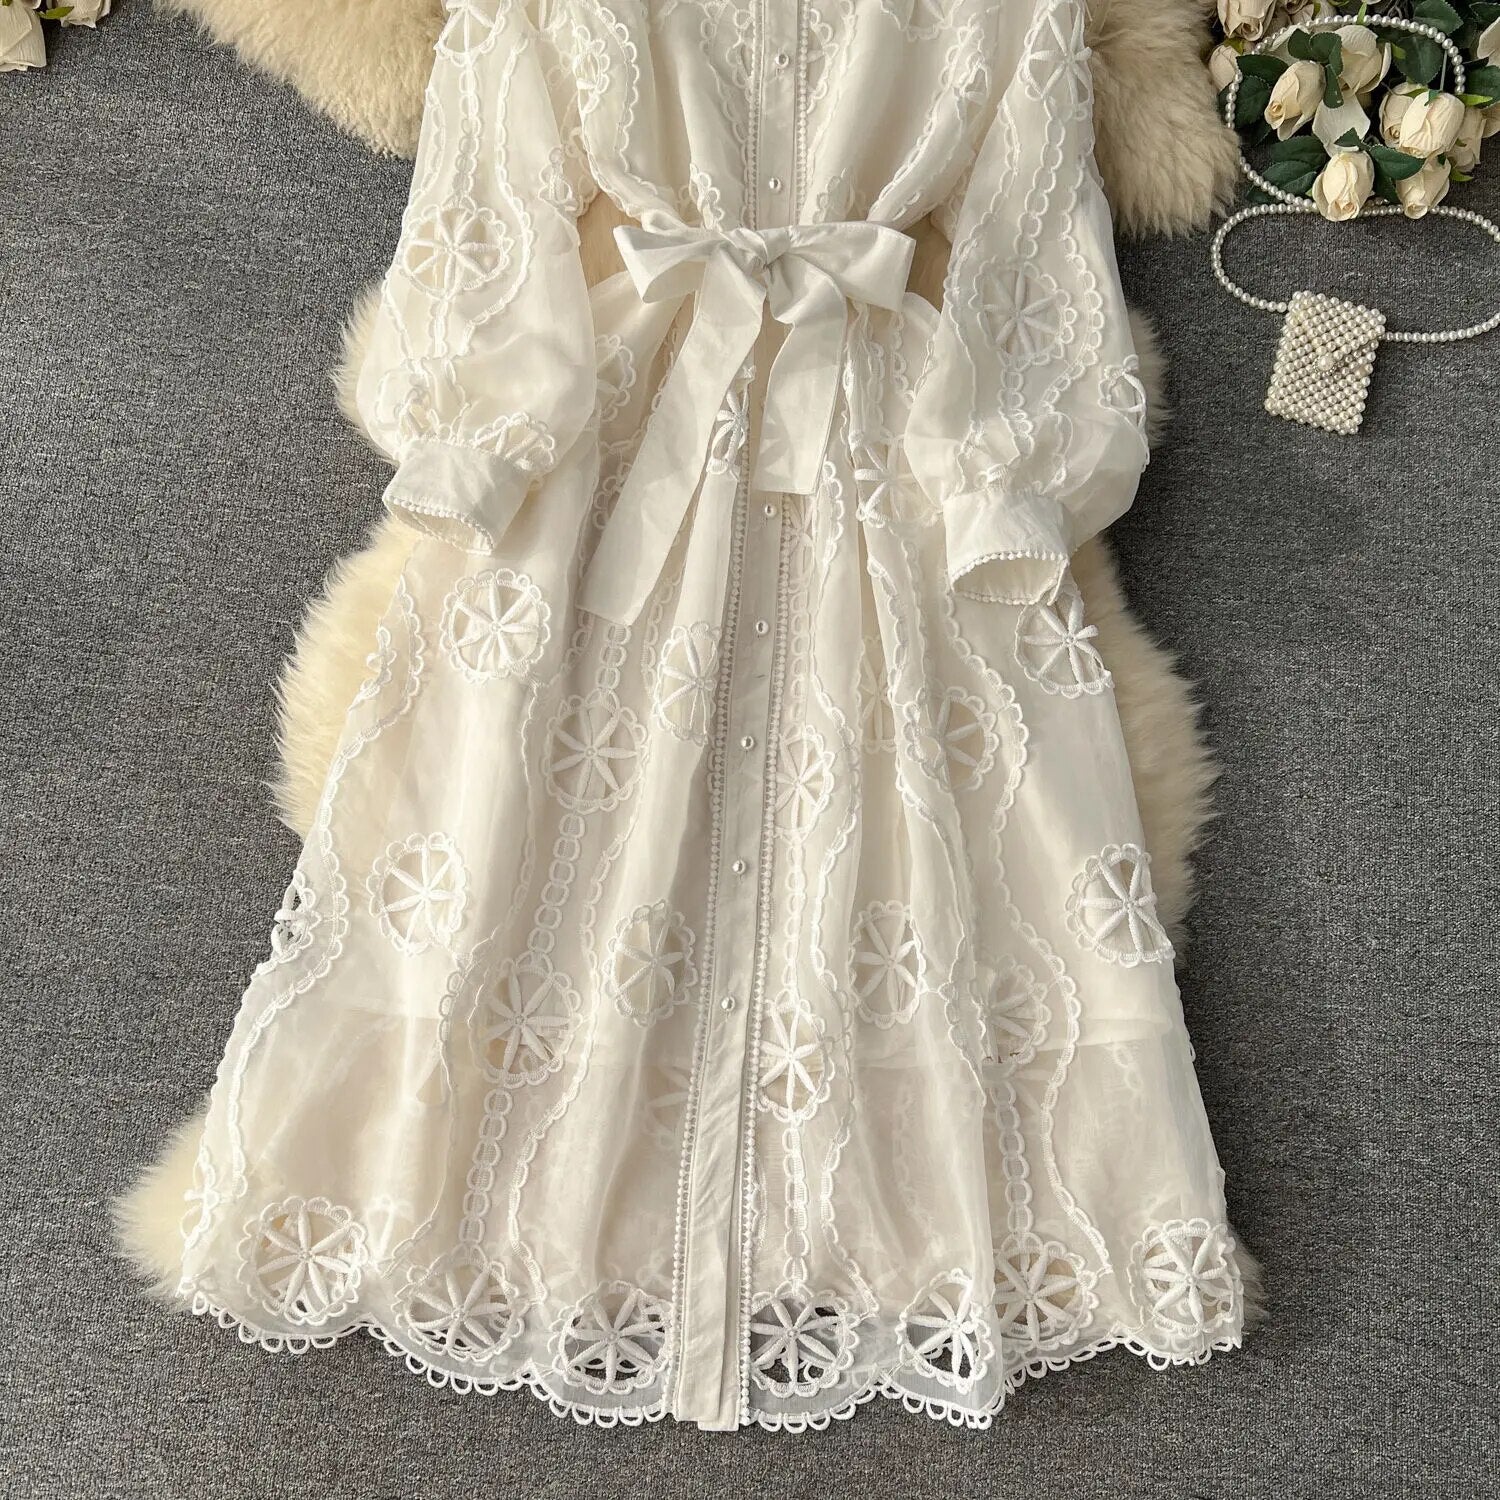 Cora Lace Hollow out Dress